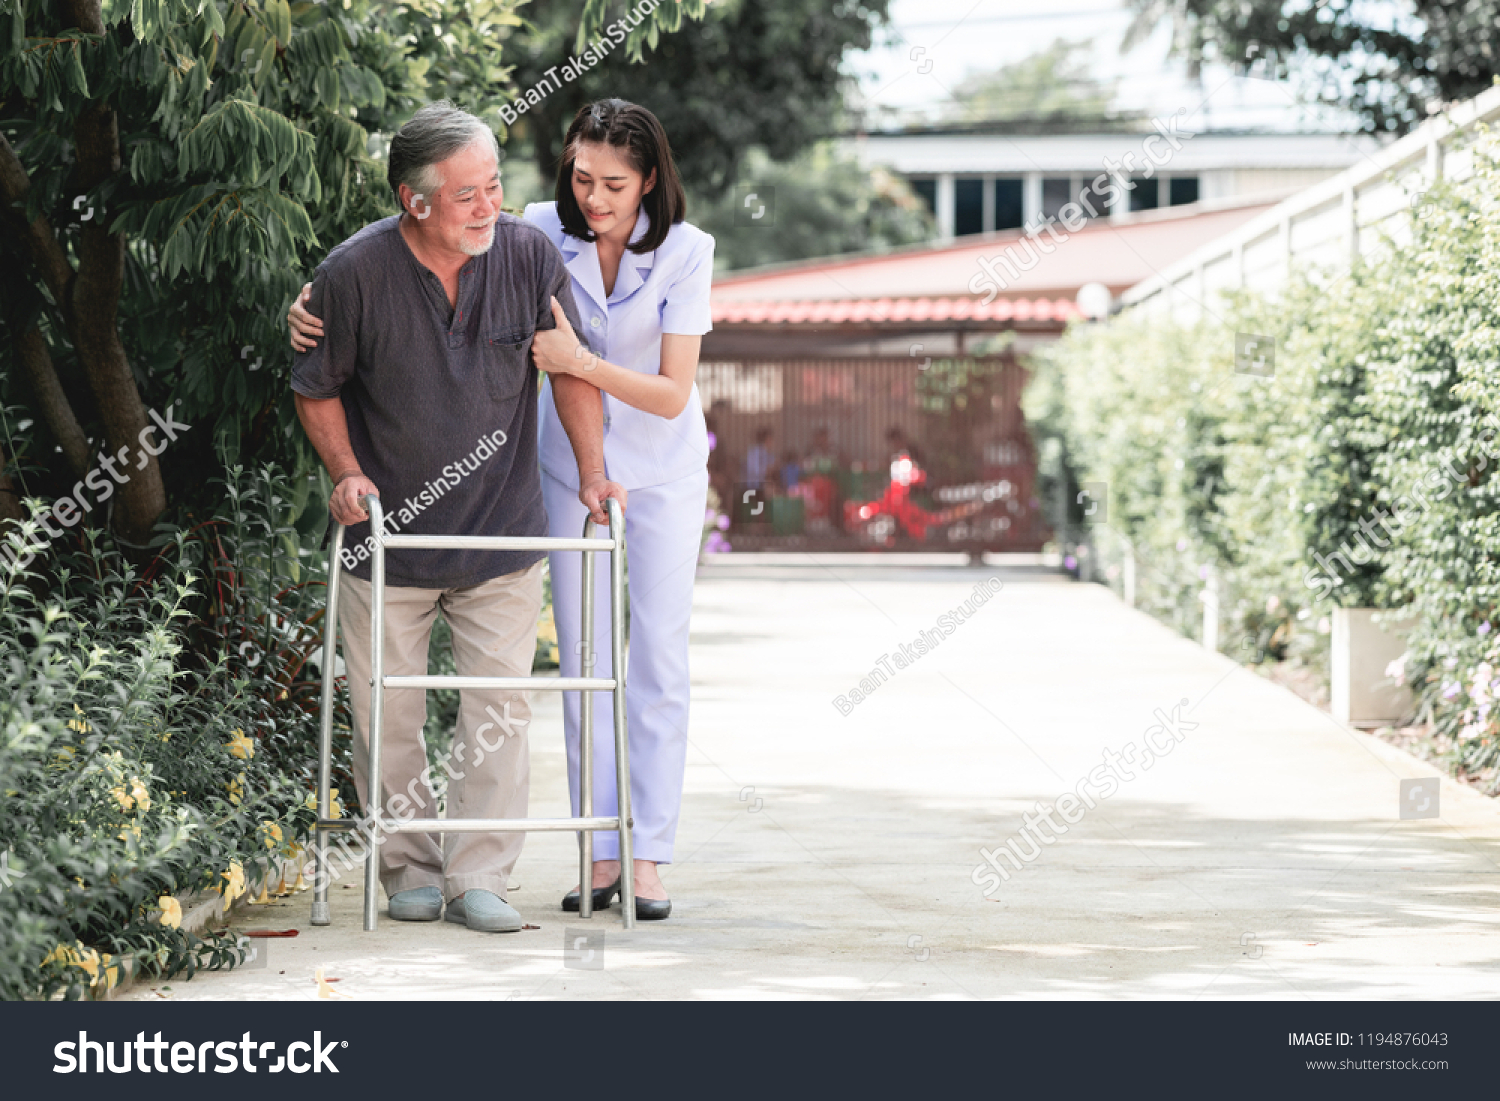 Nurse with patient using walker in retirement home. Young female nurse holding old man's shoulder in outdoor garden walking. Senior care, care taker and senior retirement home service concept. #1194876043